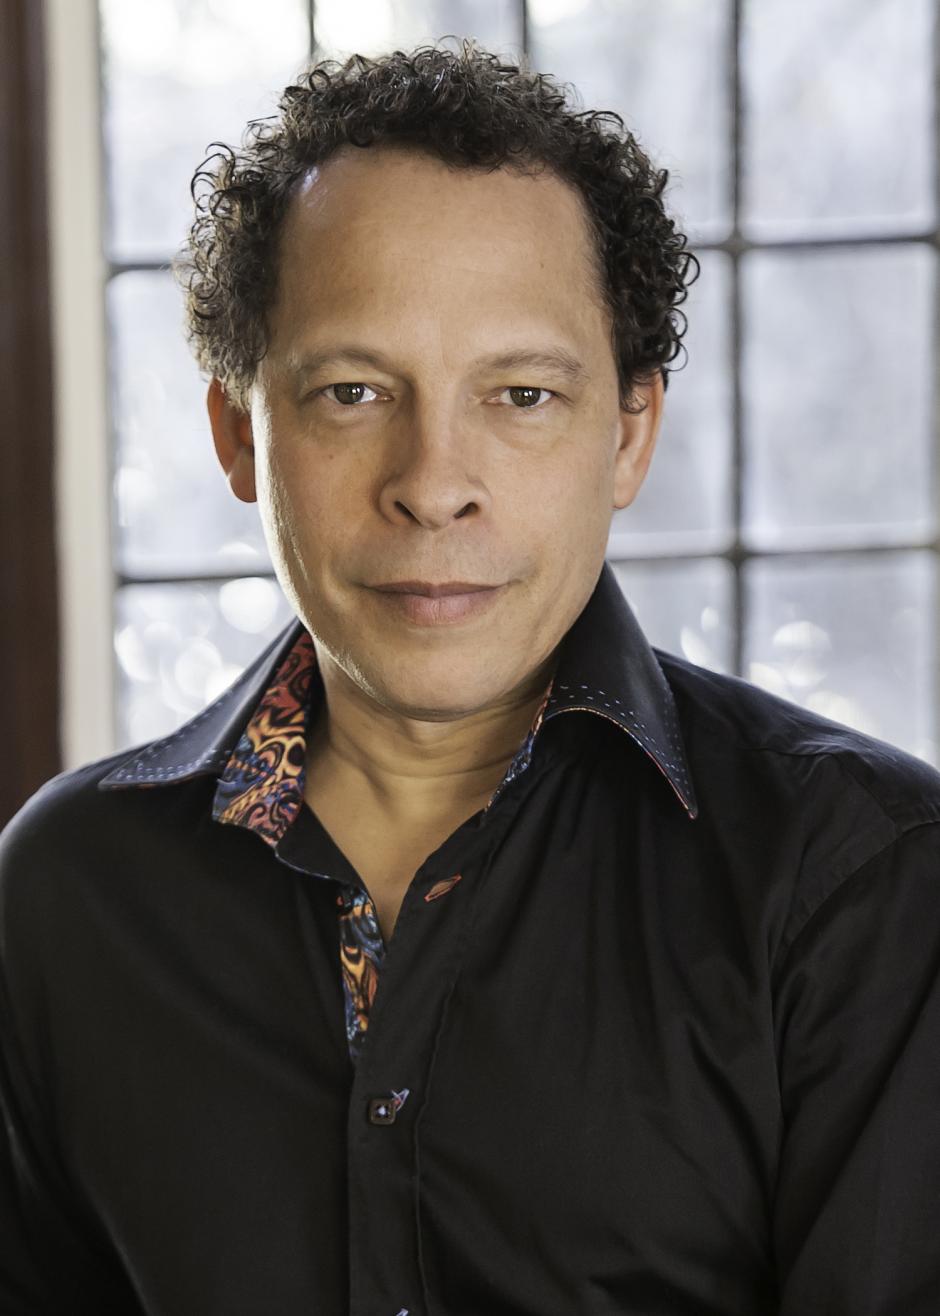 Canadian author Lawrence Hill